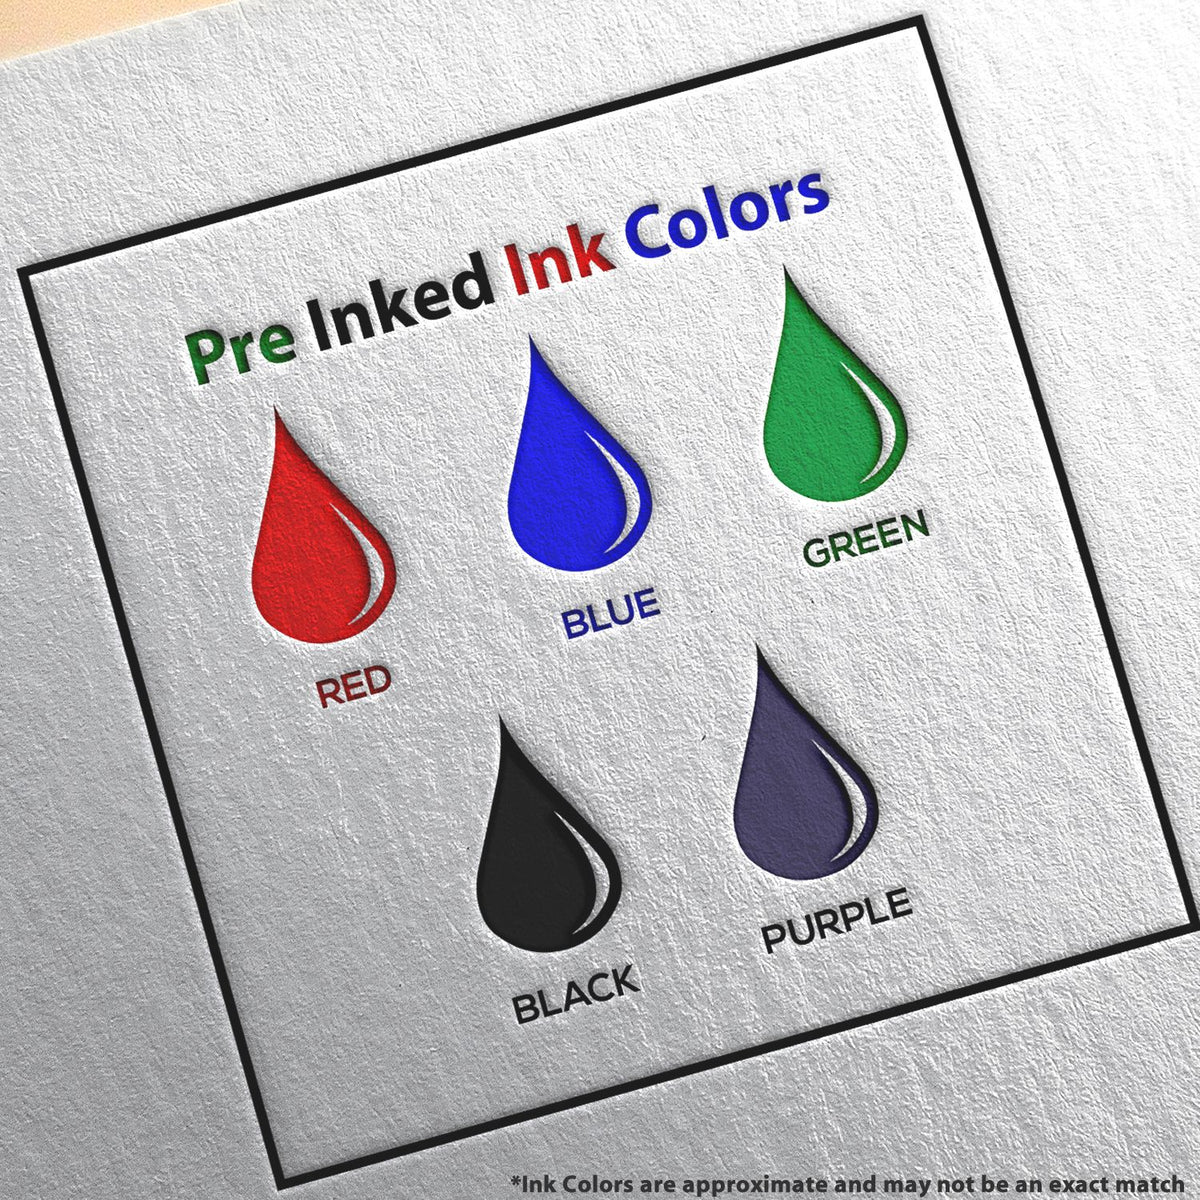 A picture showing the different ink colors or hues available for the Premium MaxLight Pre-Inked Tennessee Landscape Architectural Stamp product.